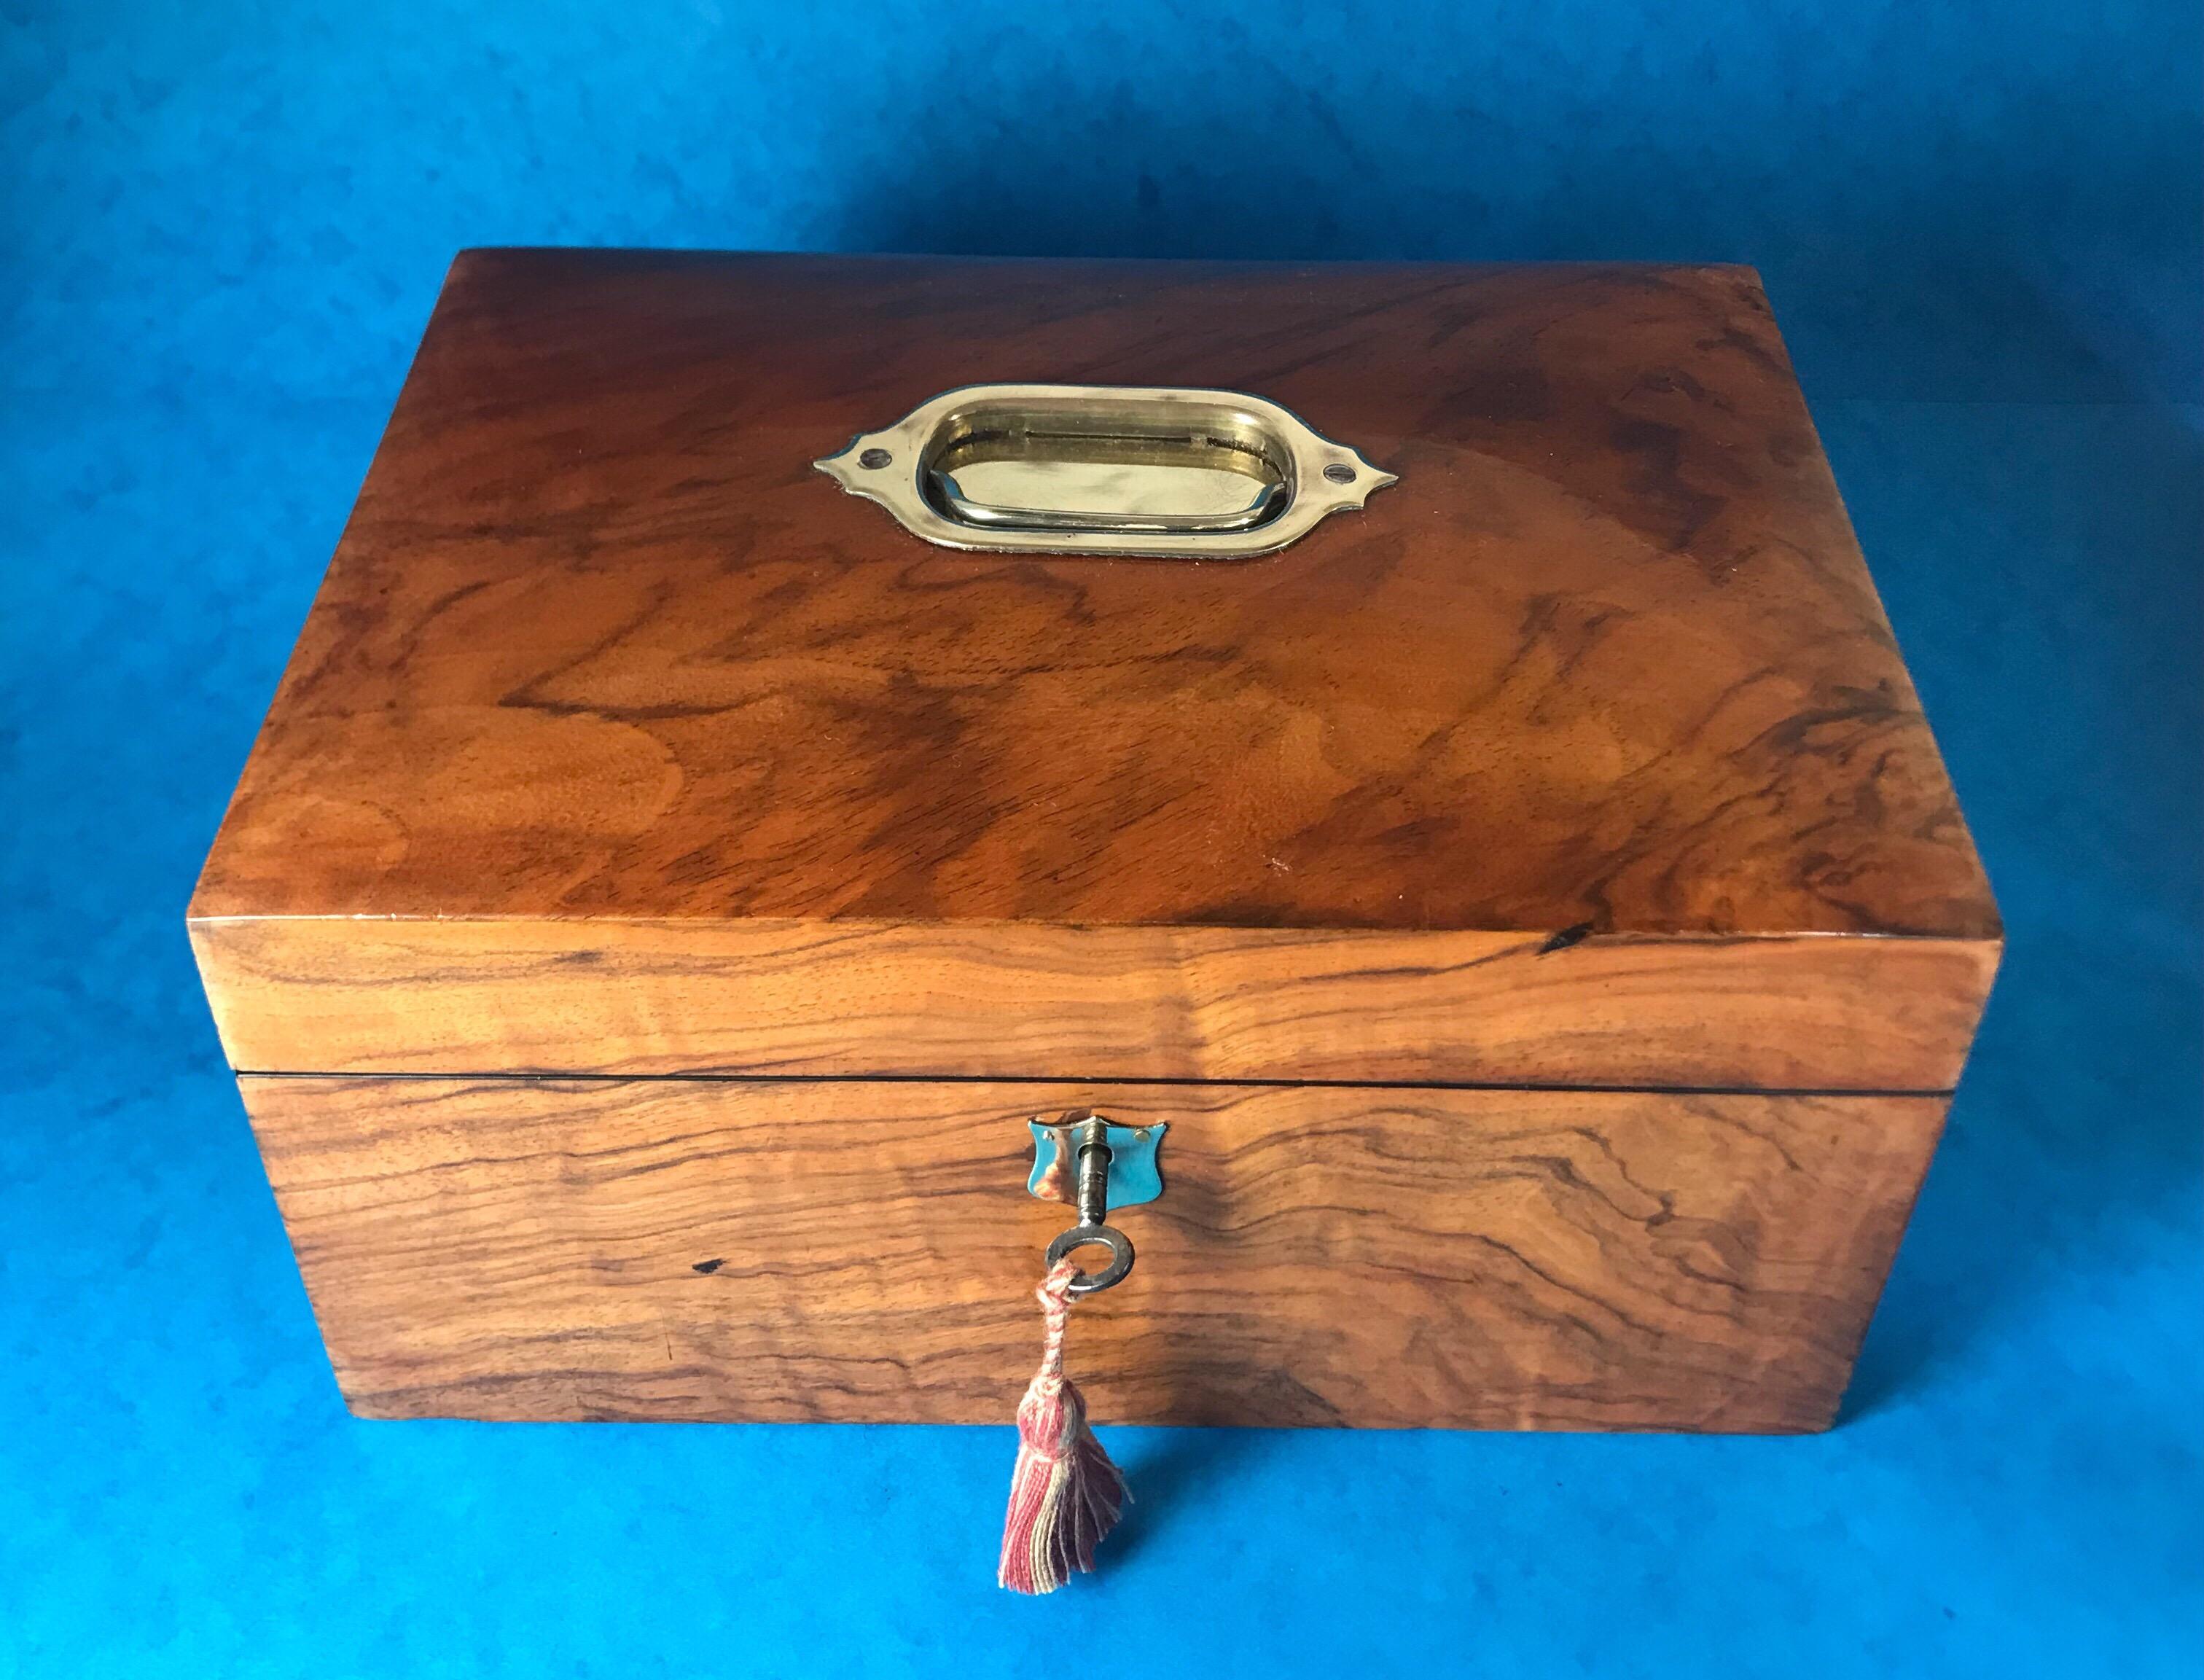 Antique Victorian Walnut jewellery box that dates back to 1880, it’s in superb condition with a brass handle to its slightly dome shaped top and brass shield key escutcheon. The jewellery box has its original red silk interior to the back of the lid